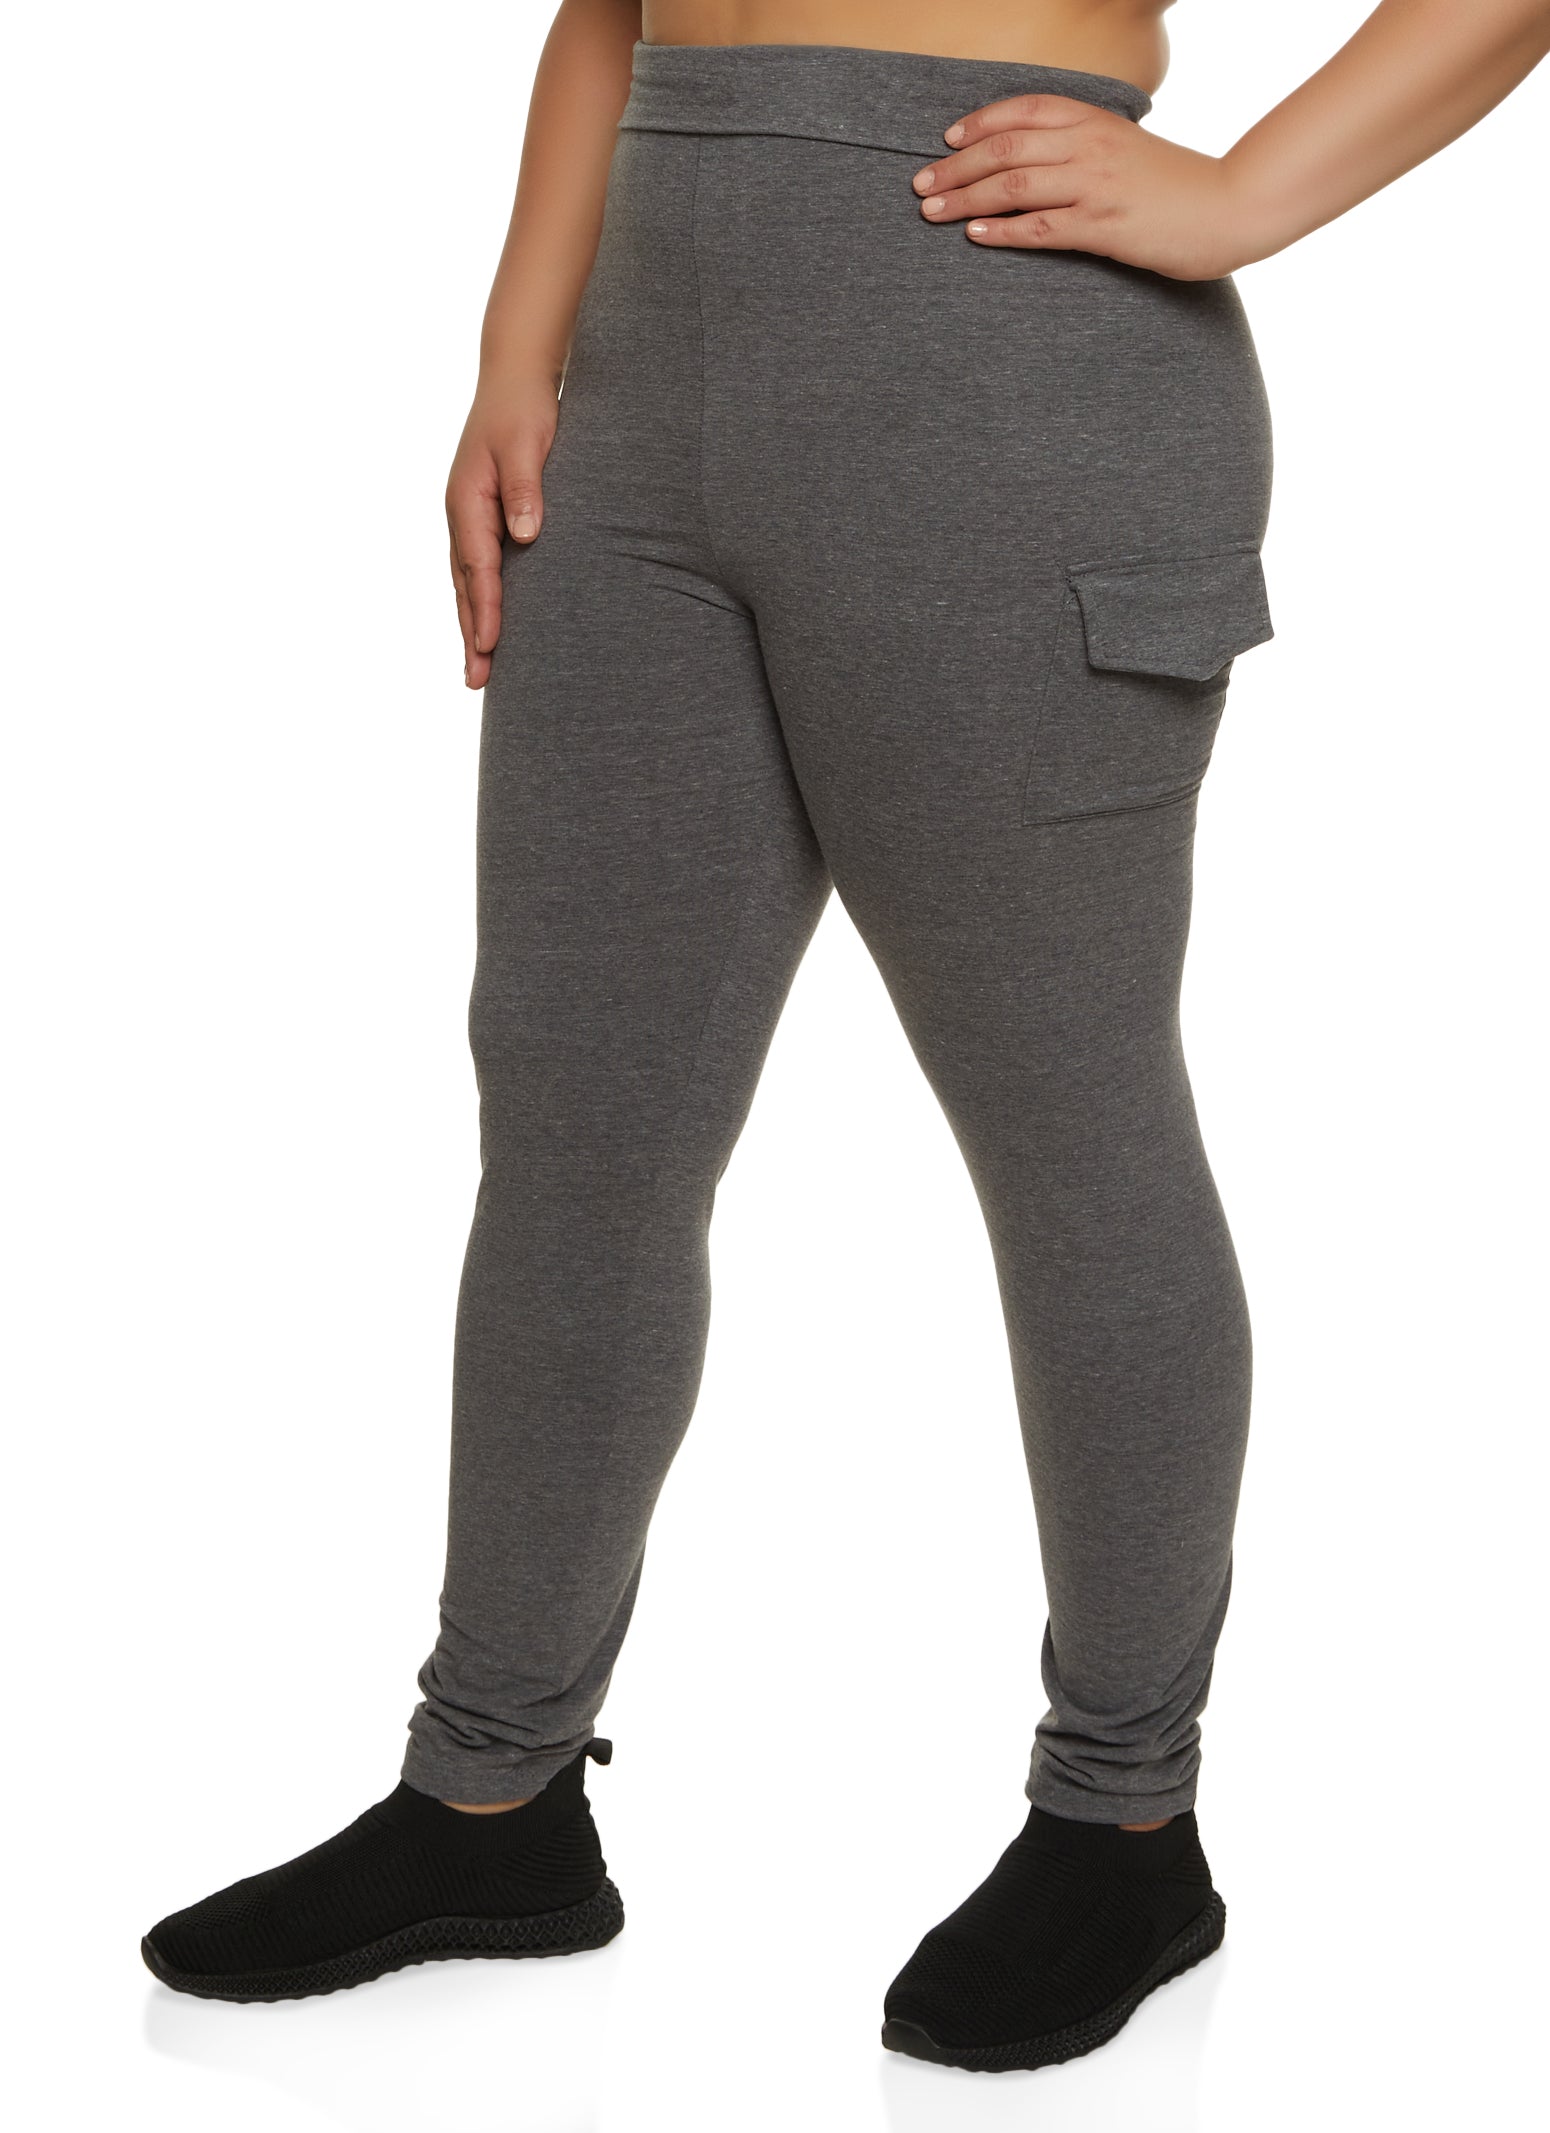 Womens Solid Charcoal Grey Leggings with Pockets